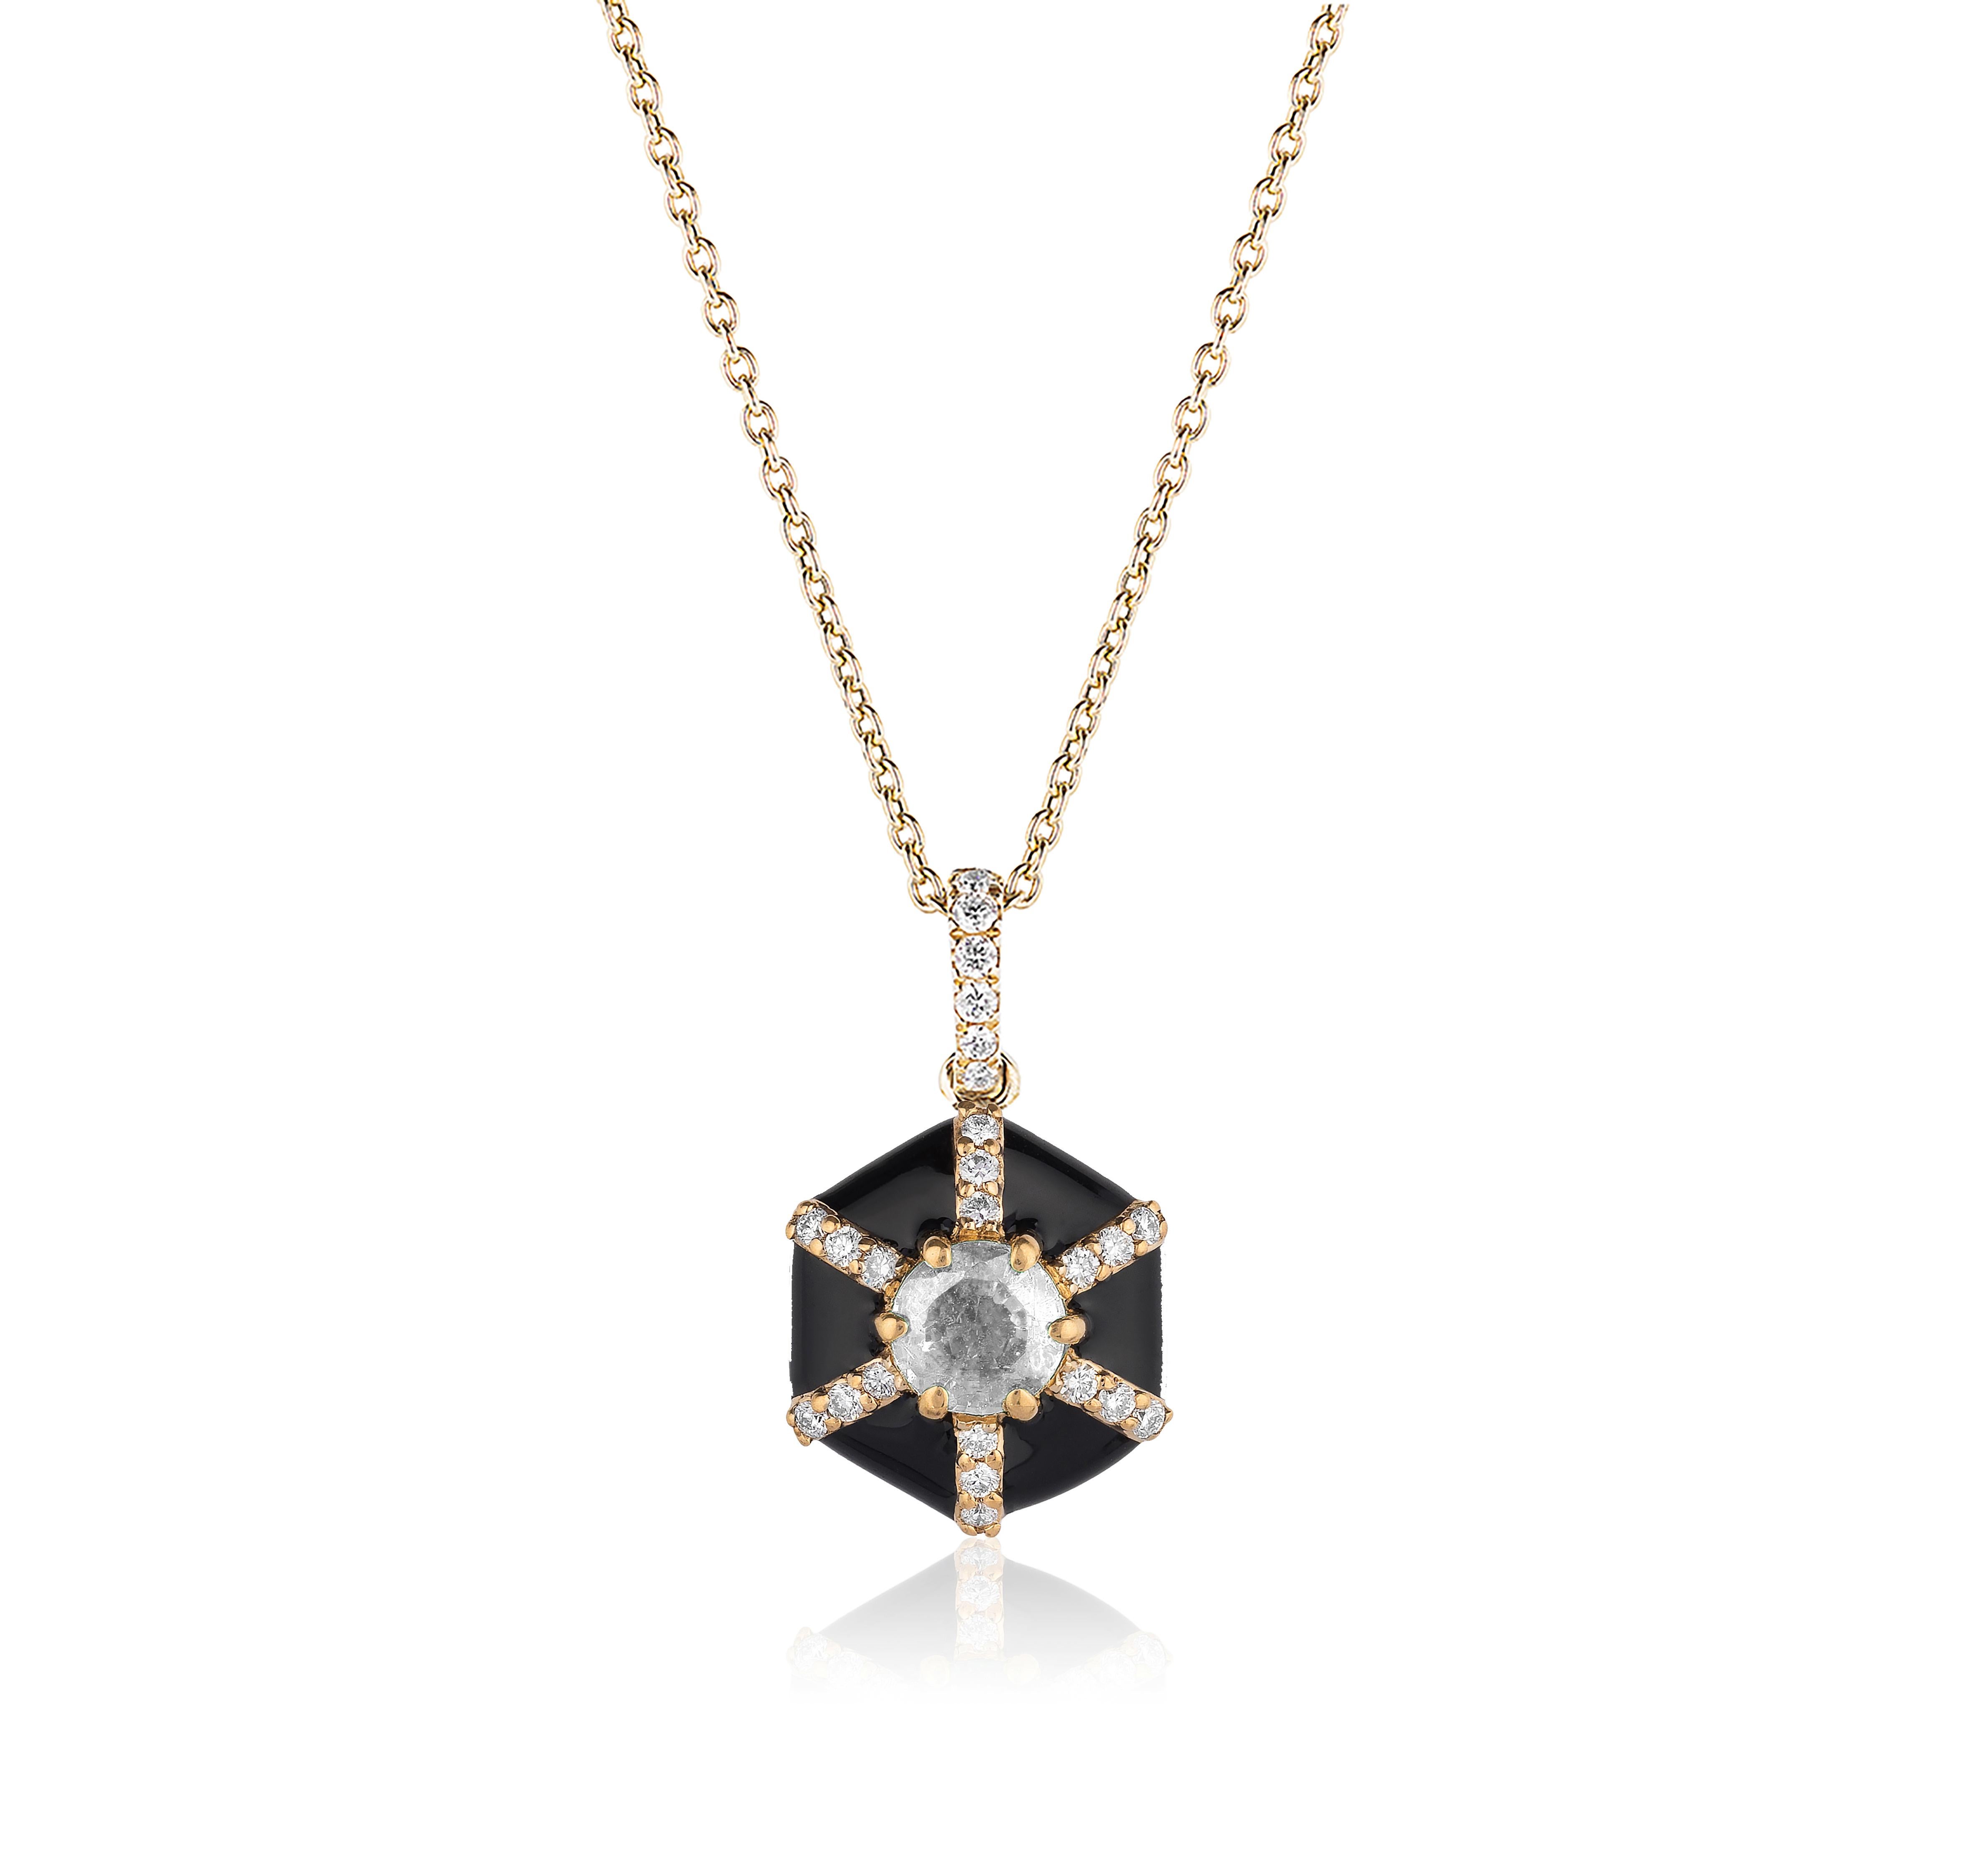 Hexagon Black Enamel Pendant with  Diamonds in 18K Yellow Gold. from ‘Queen’ Collection

Stone Size: 4 mm

Diamonds: G-H / VS, Approx. Wt: 0.10 Carats 